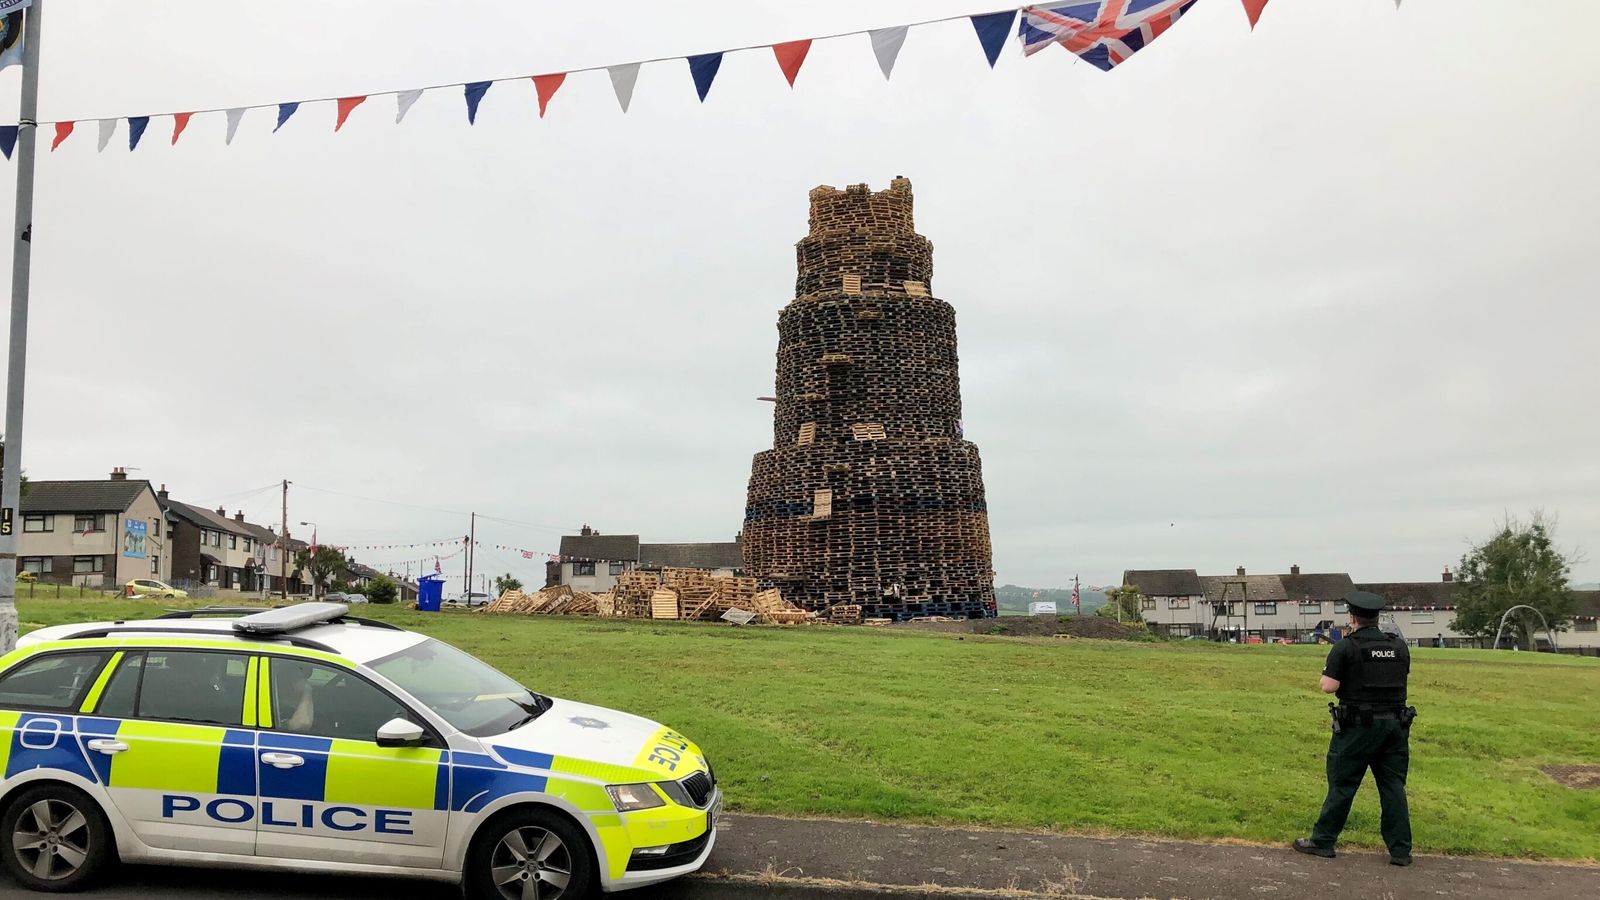 man-dies-after-falling-from-50ft-bonfire-in-northern-ireland-ahead-of-eleventh-night-celebrations